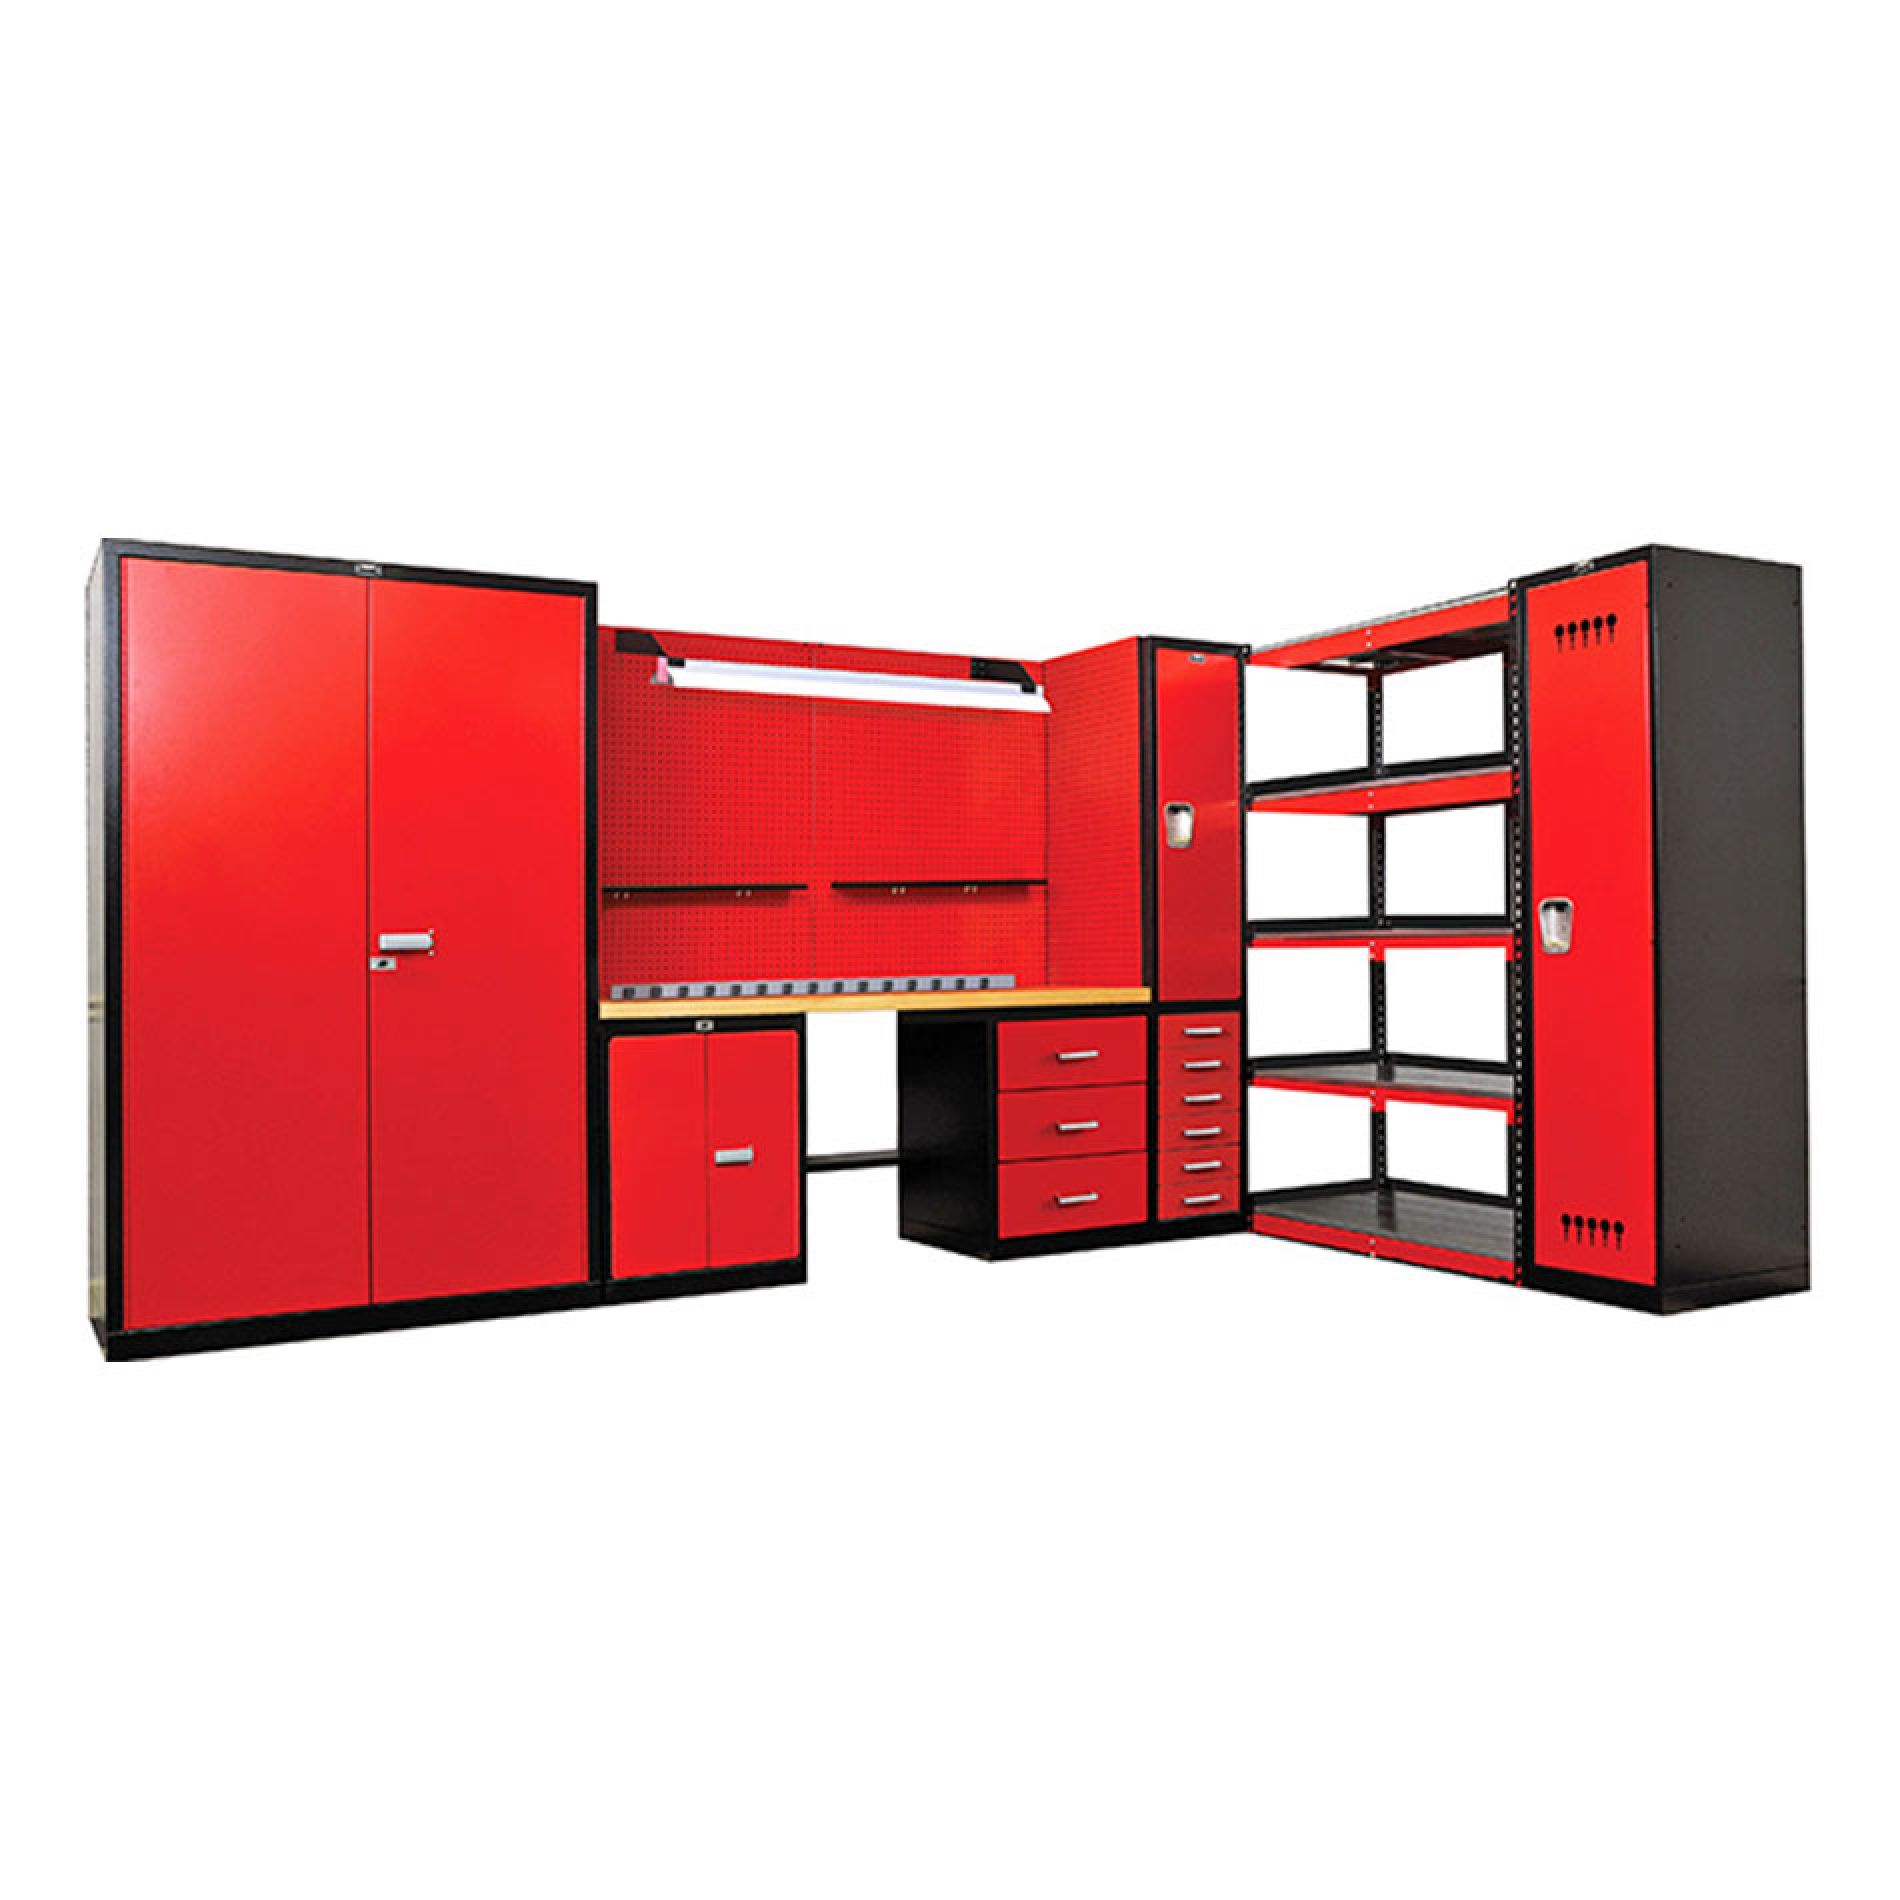 KD Cabinets Gallery Image